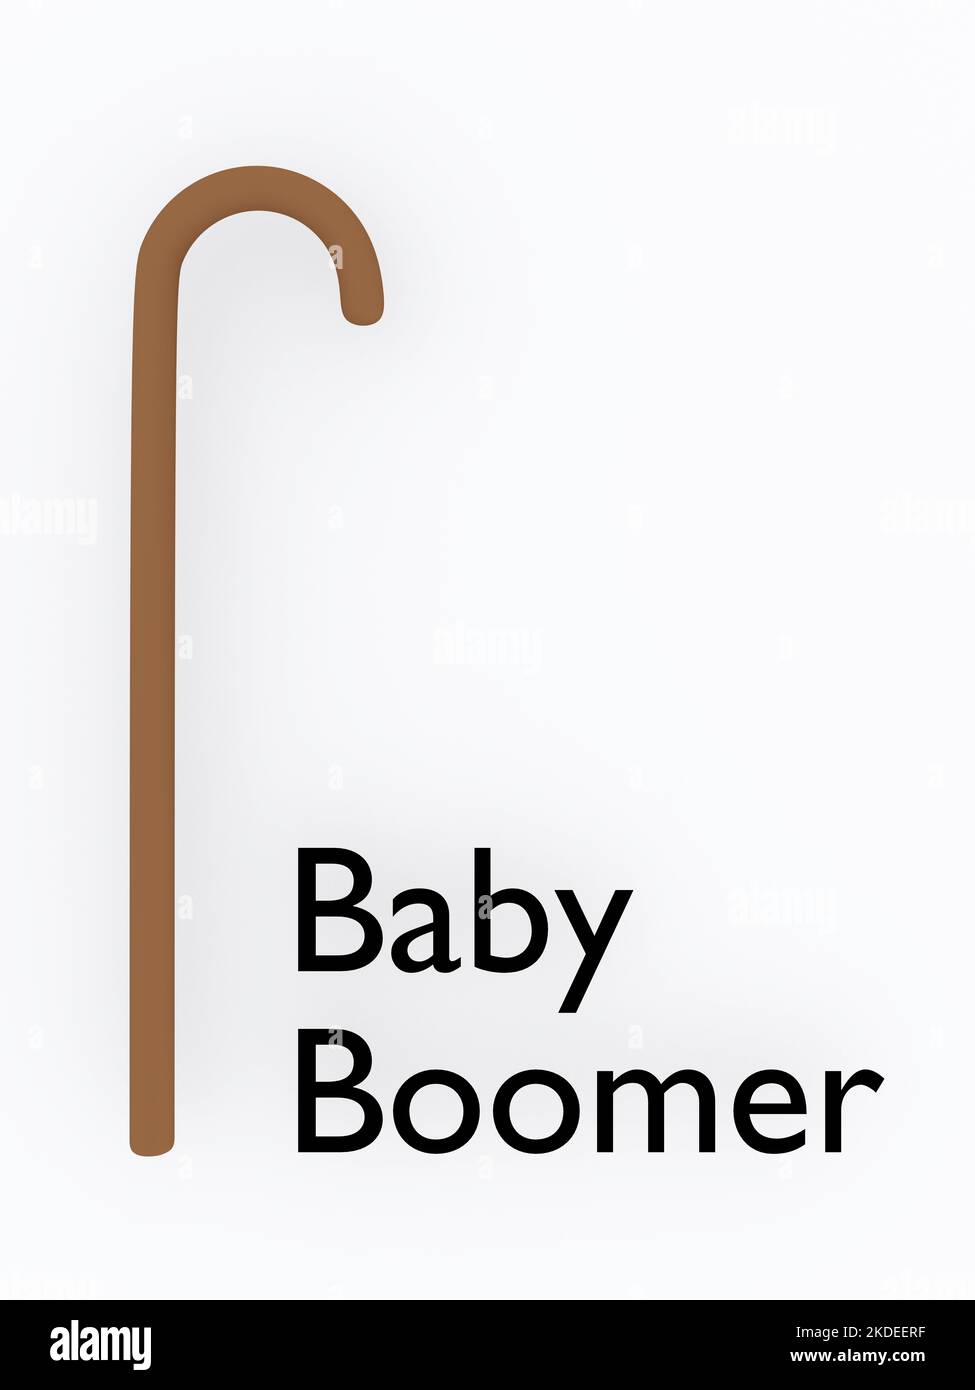 3D illustration of a walking stick, representing people born from 1946 to 1964 with the script Baby Boomer. Stock Photo